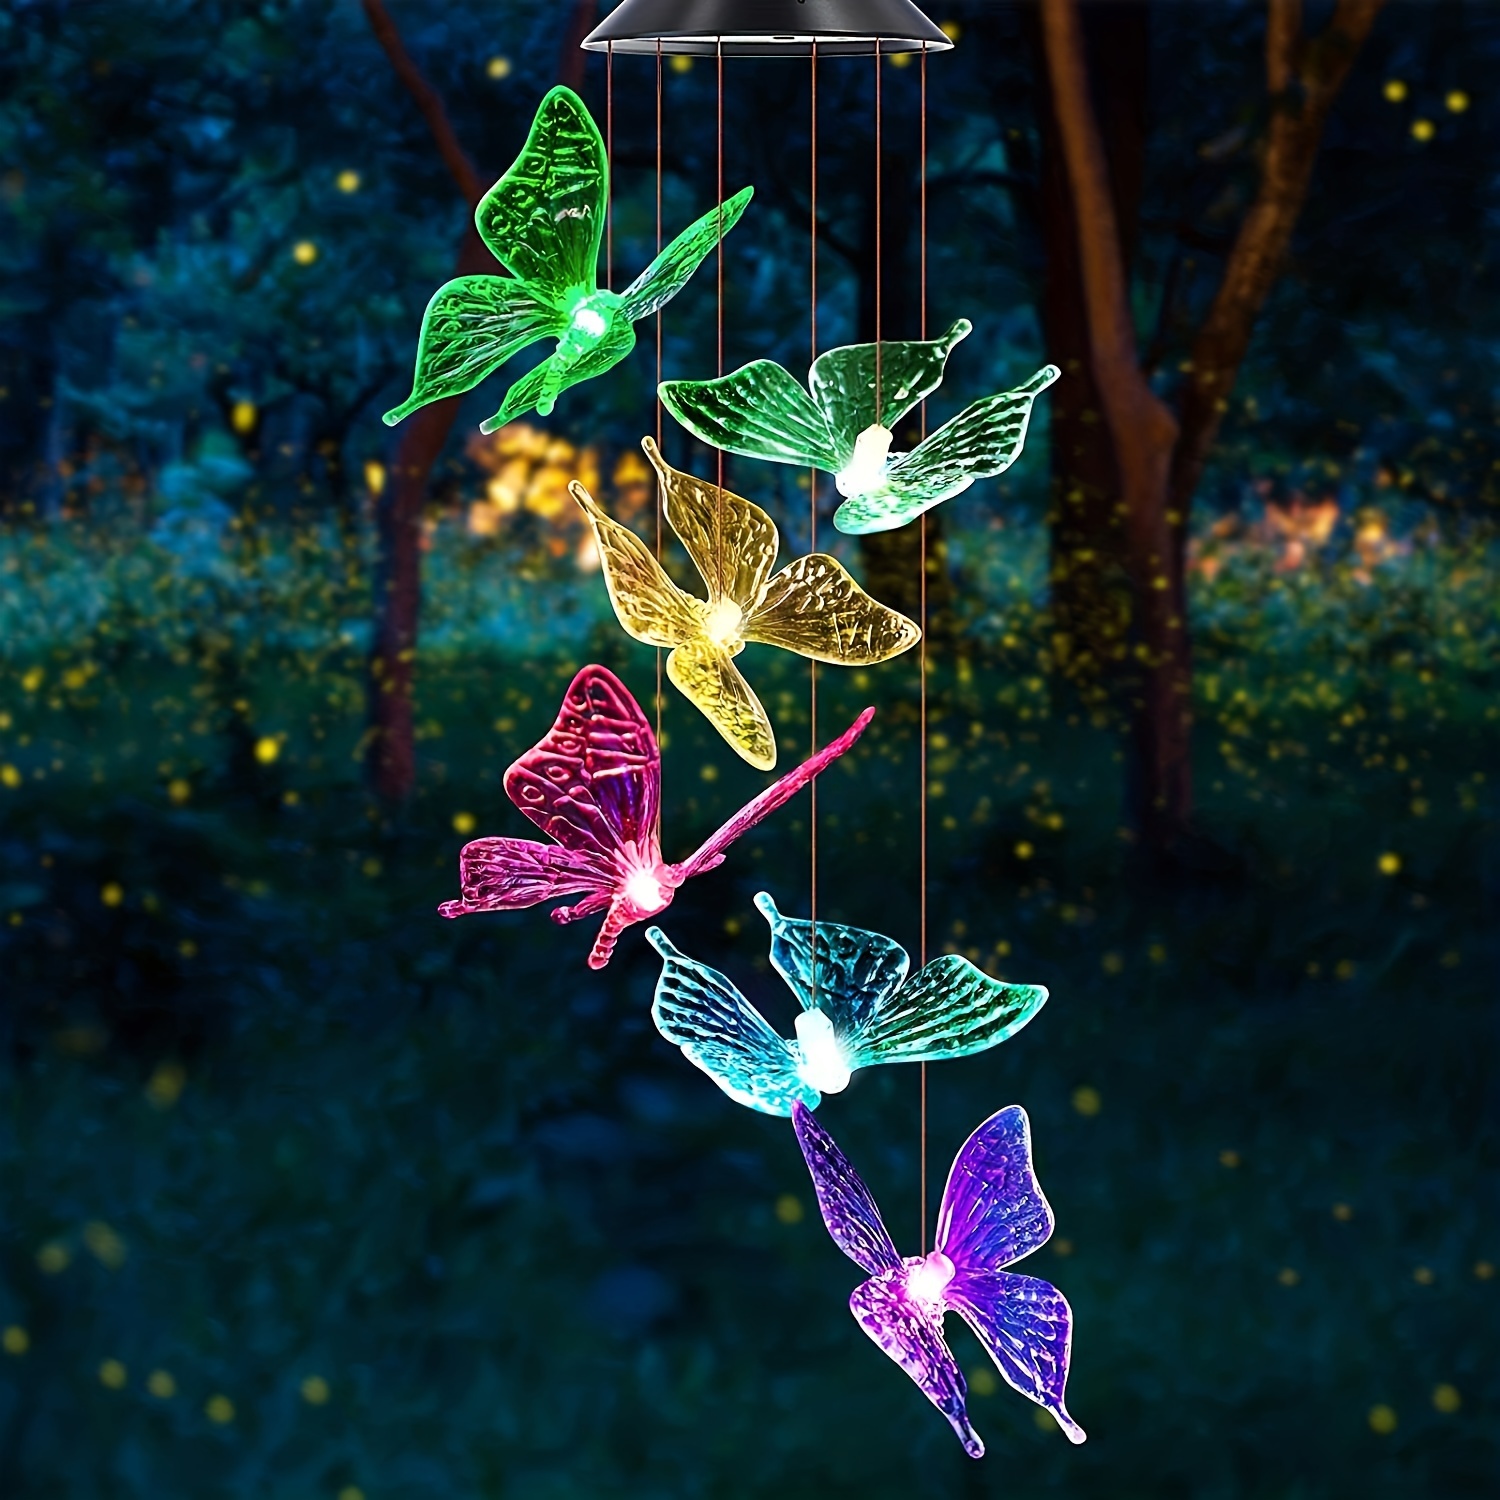 

1pc Solar Wind Chimes With 6 Led Lights, Butterfly Shaped Wind Chime Hanging Ornament, Wind Chimes Crafts For Outside Decoration, Outdoor Garden, Patio, Backyard, Front Yard Hanging Ornaments